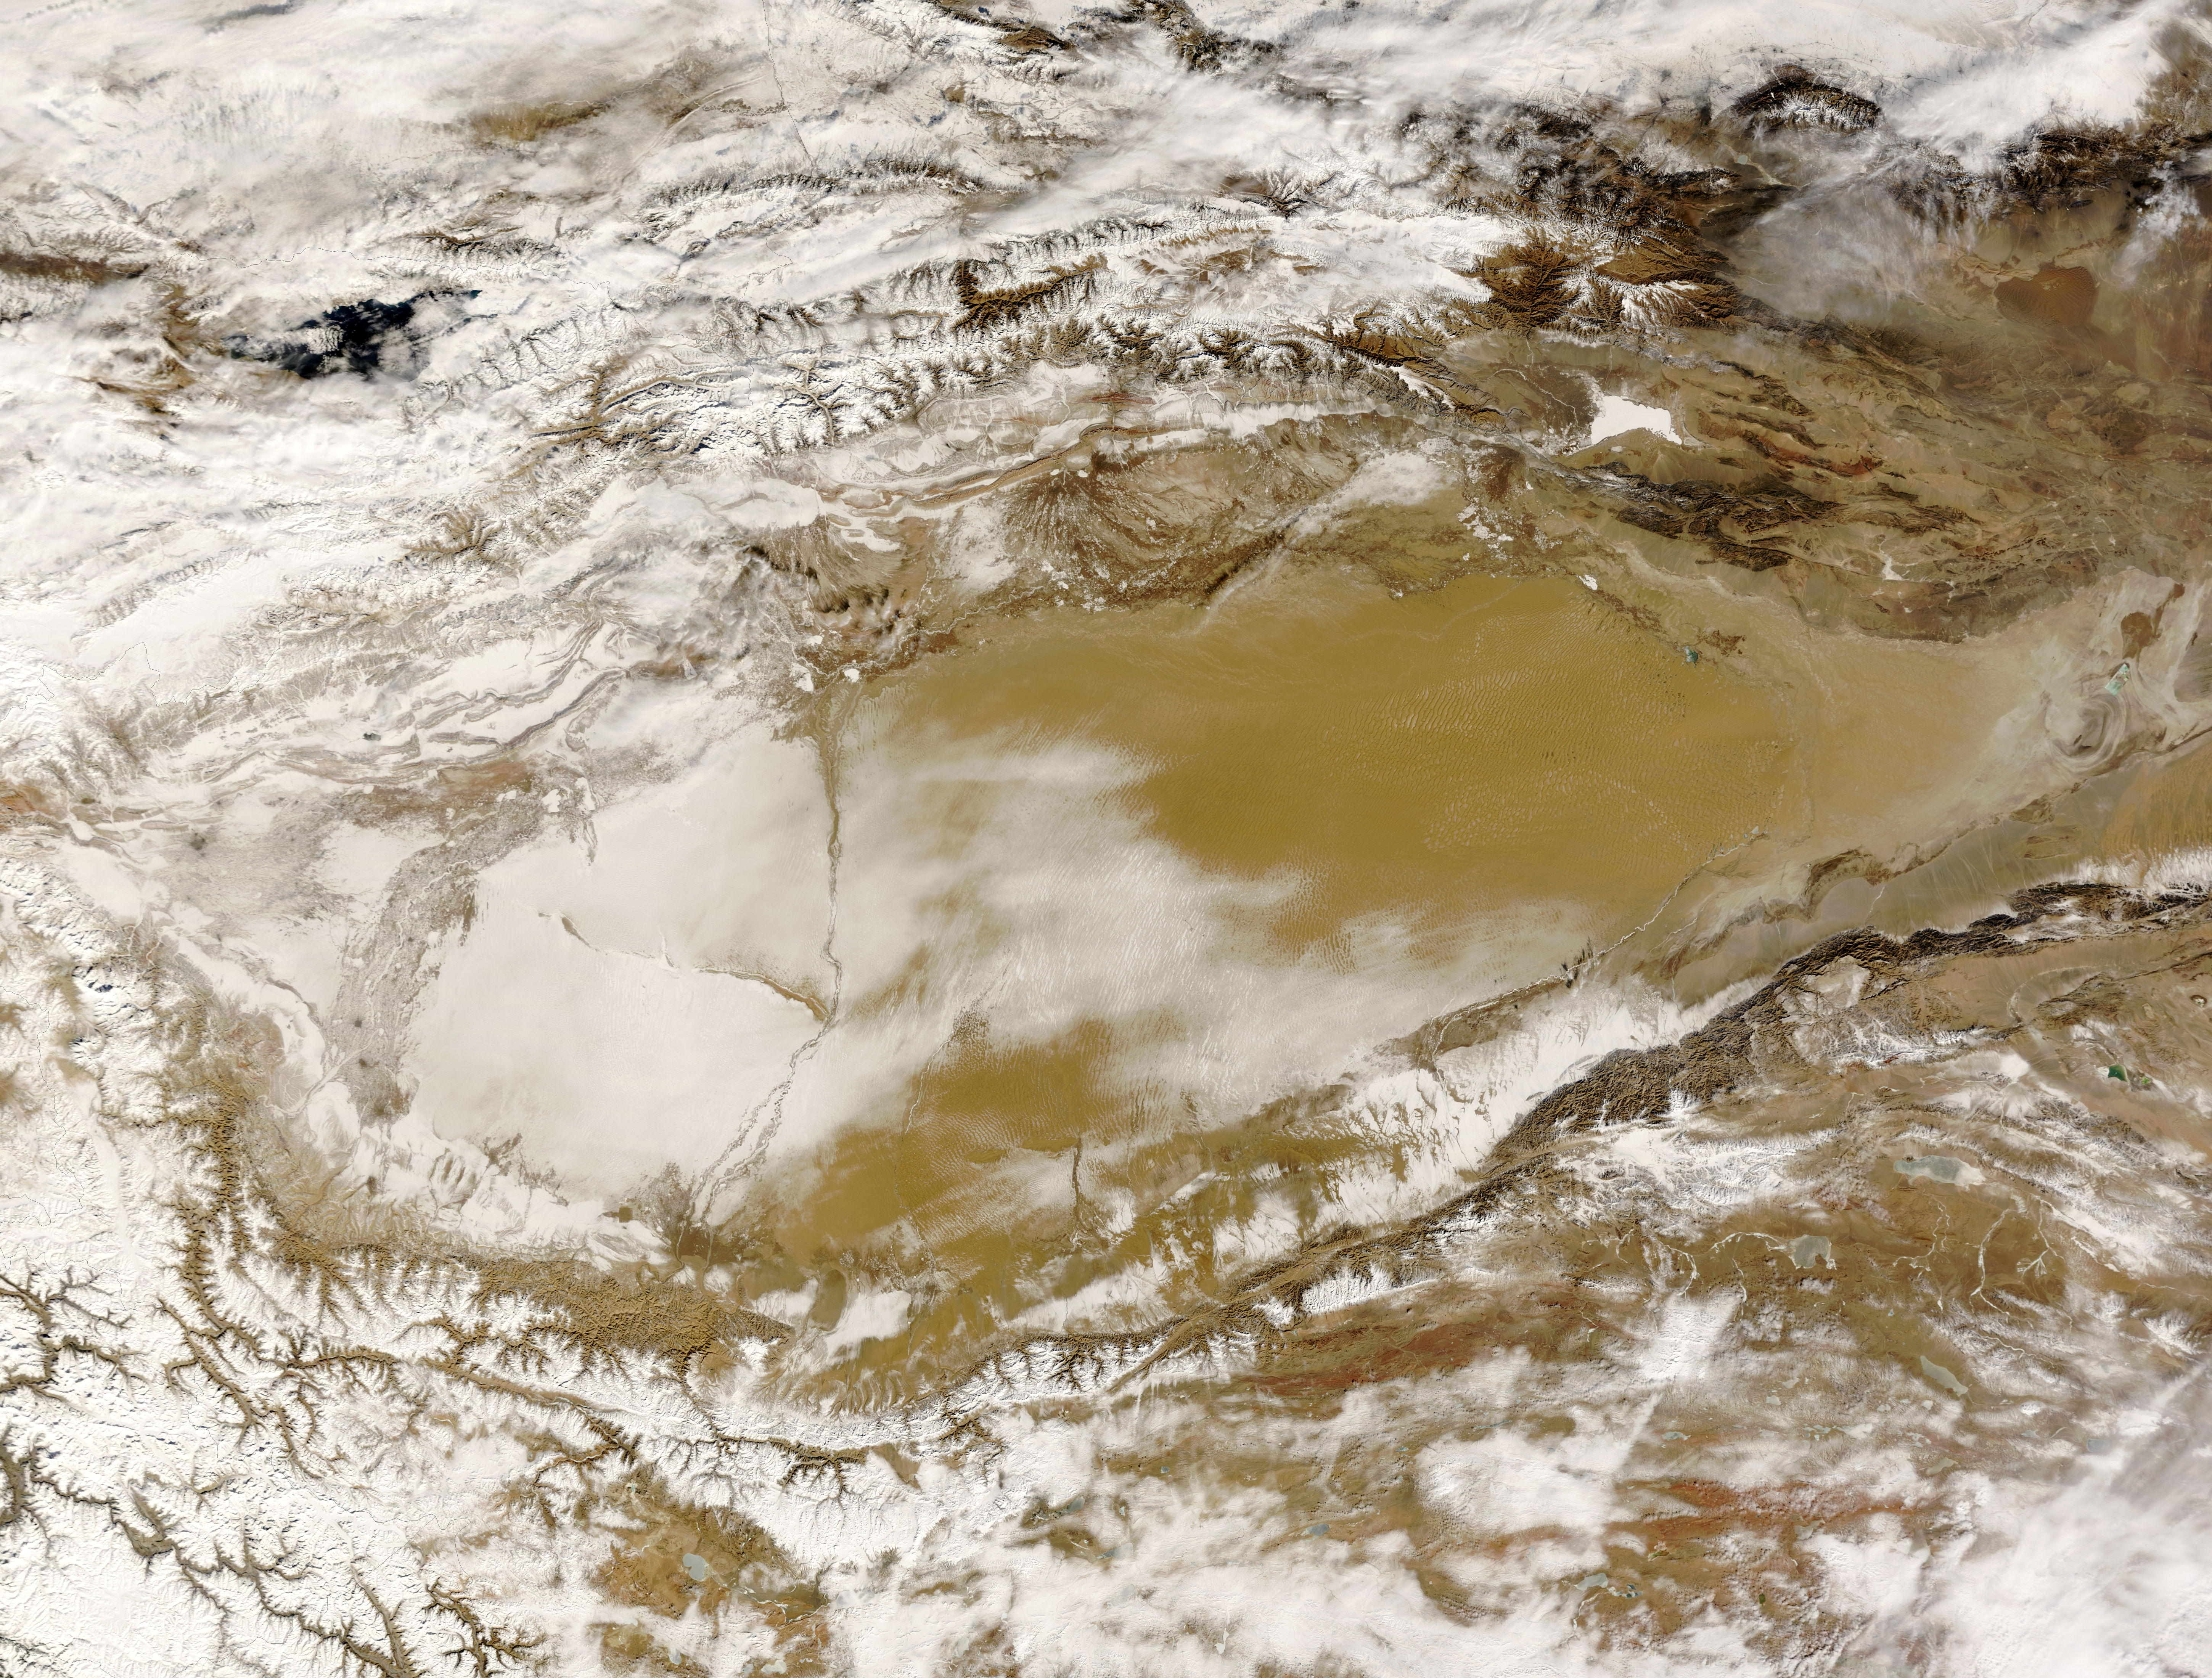 Snow in Taklimakan Desert, Western China - related image preview